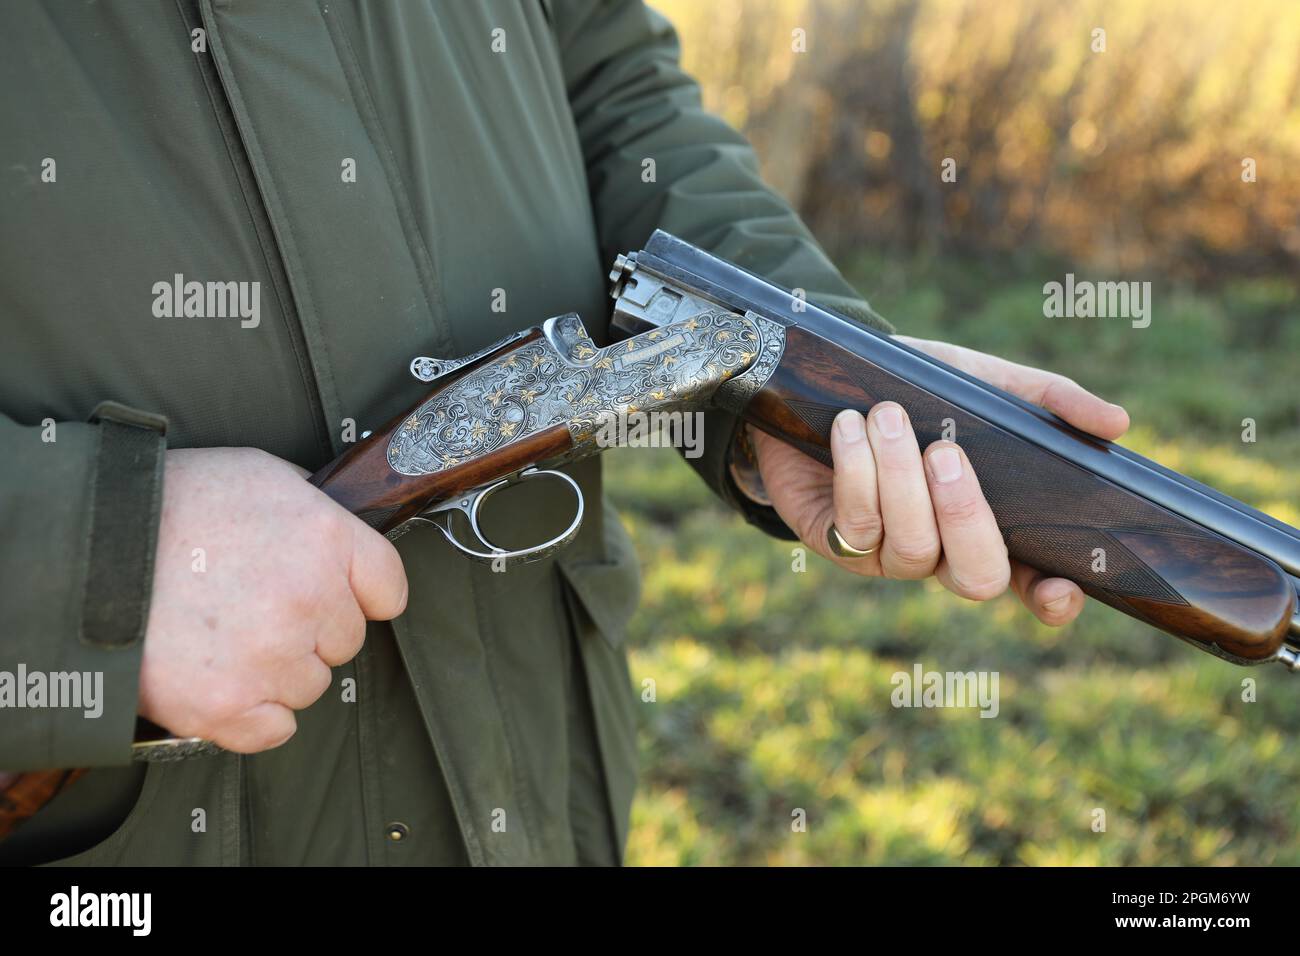 A close up of a man shooting game in the countryside Stock Photo